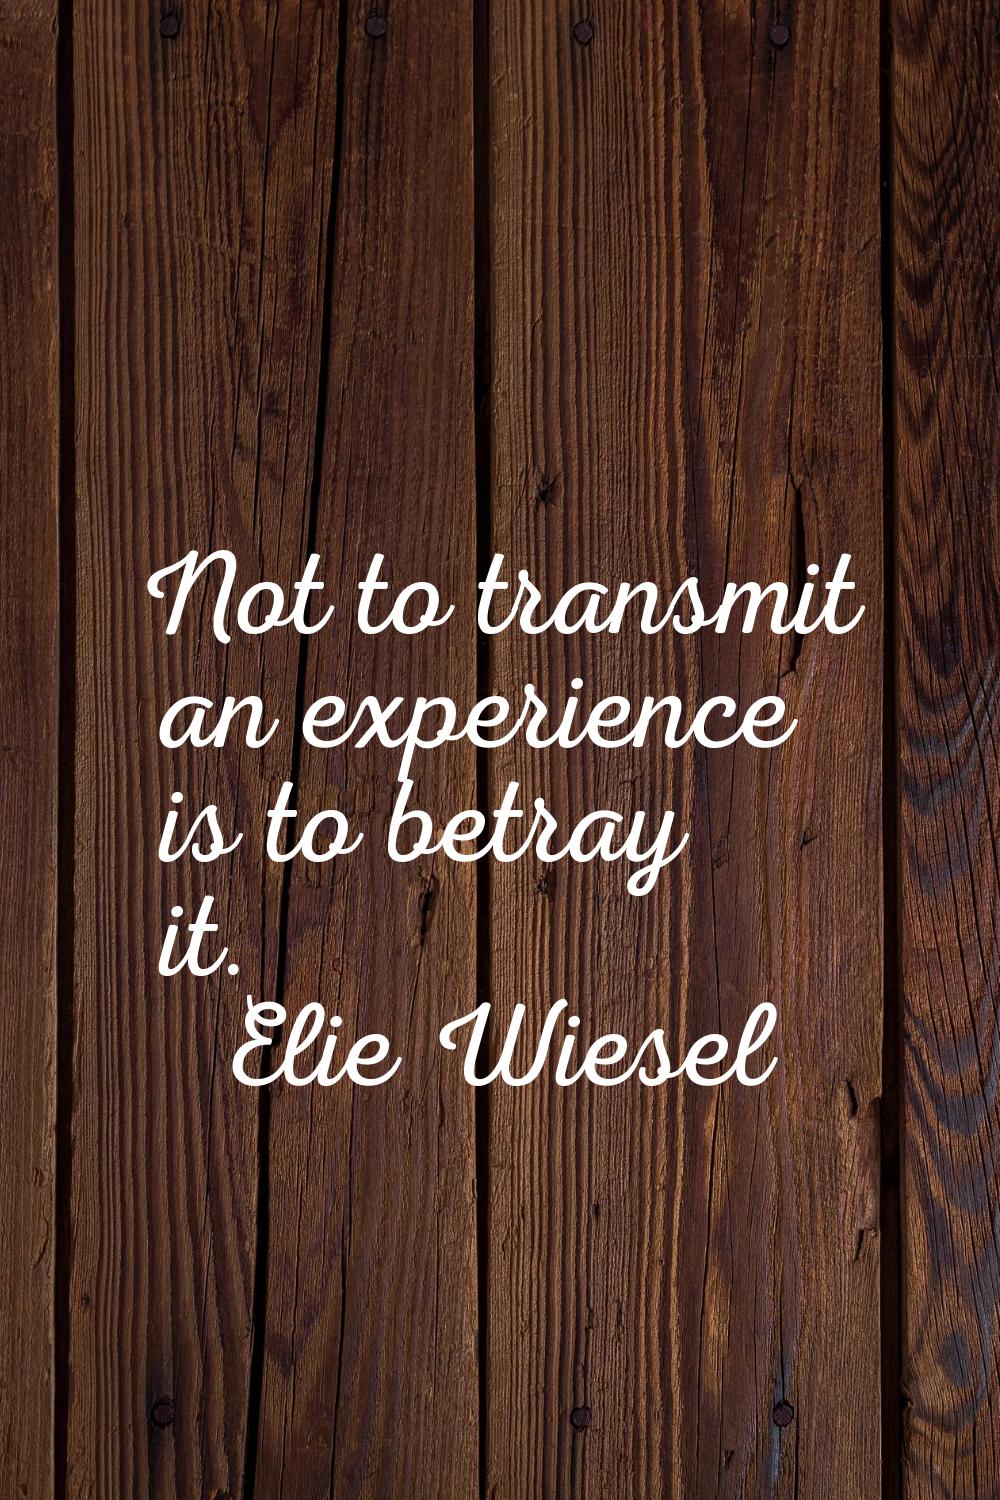 Not to transmit an experience is to betray it.